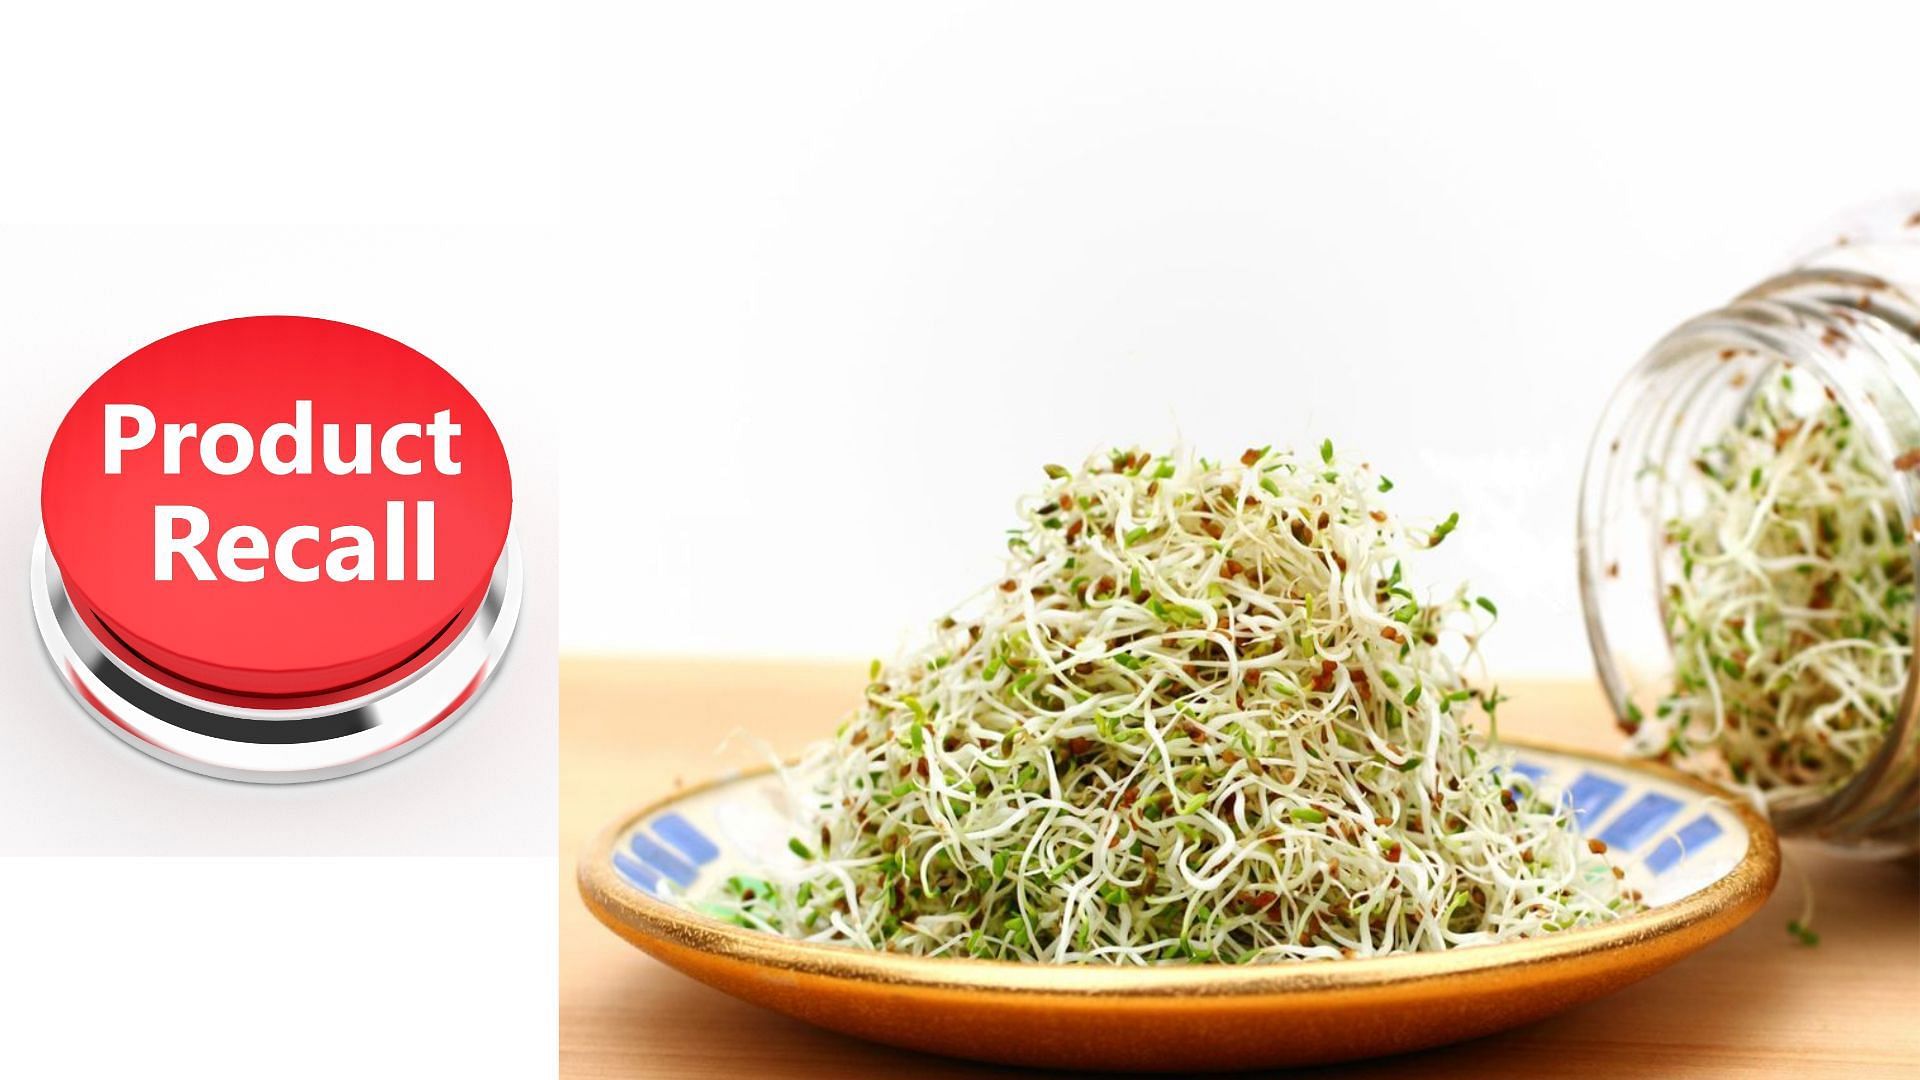 Sunsprouts recalls Alfafa sprouts over Salmonella concerns (Image via Noderog/Getty Images)